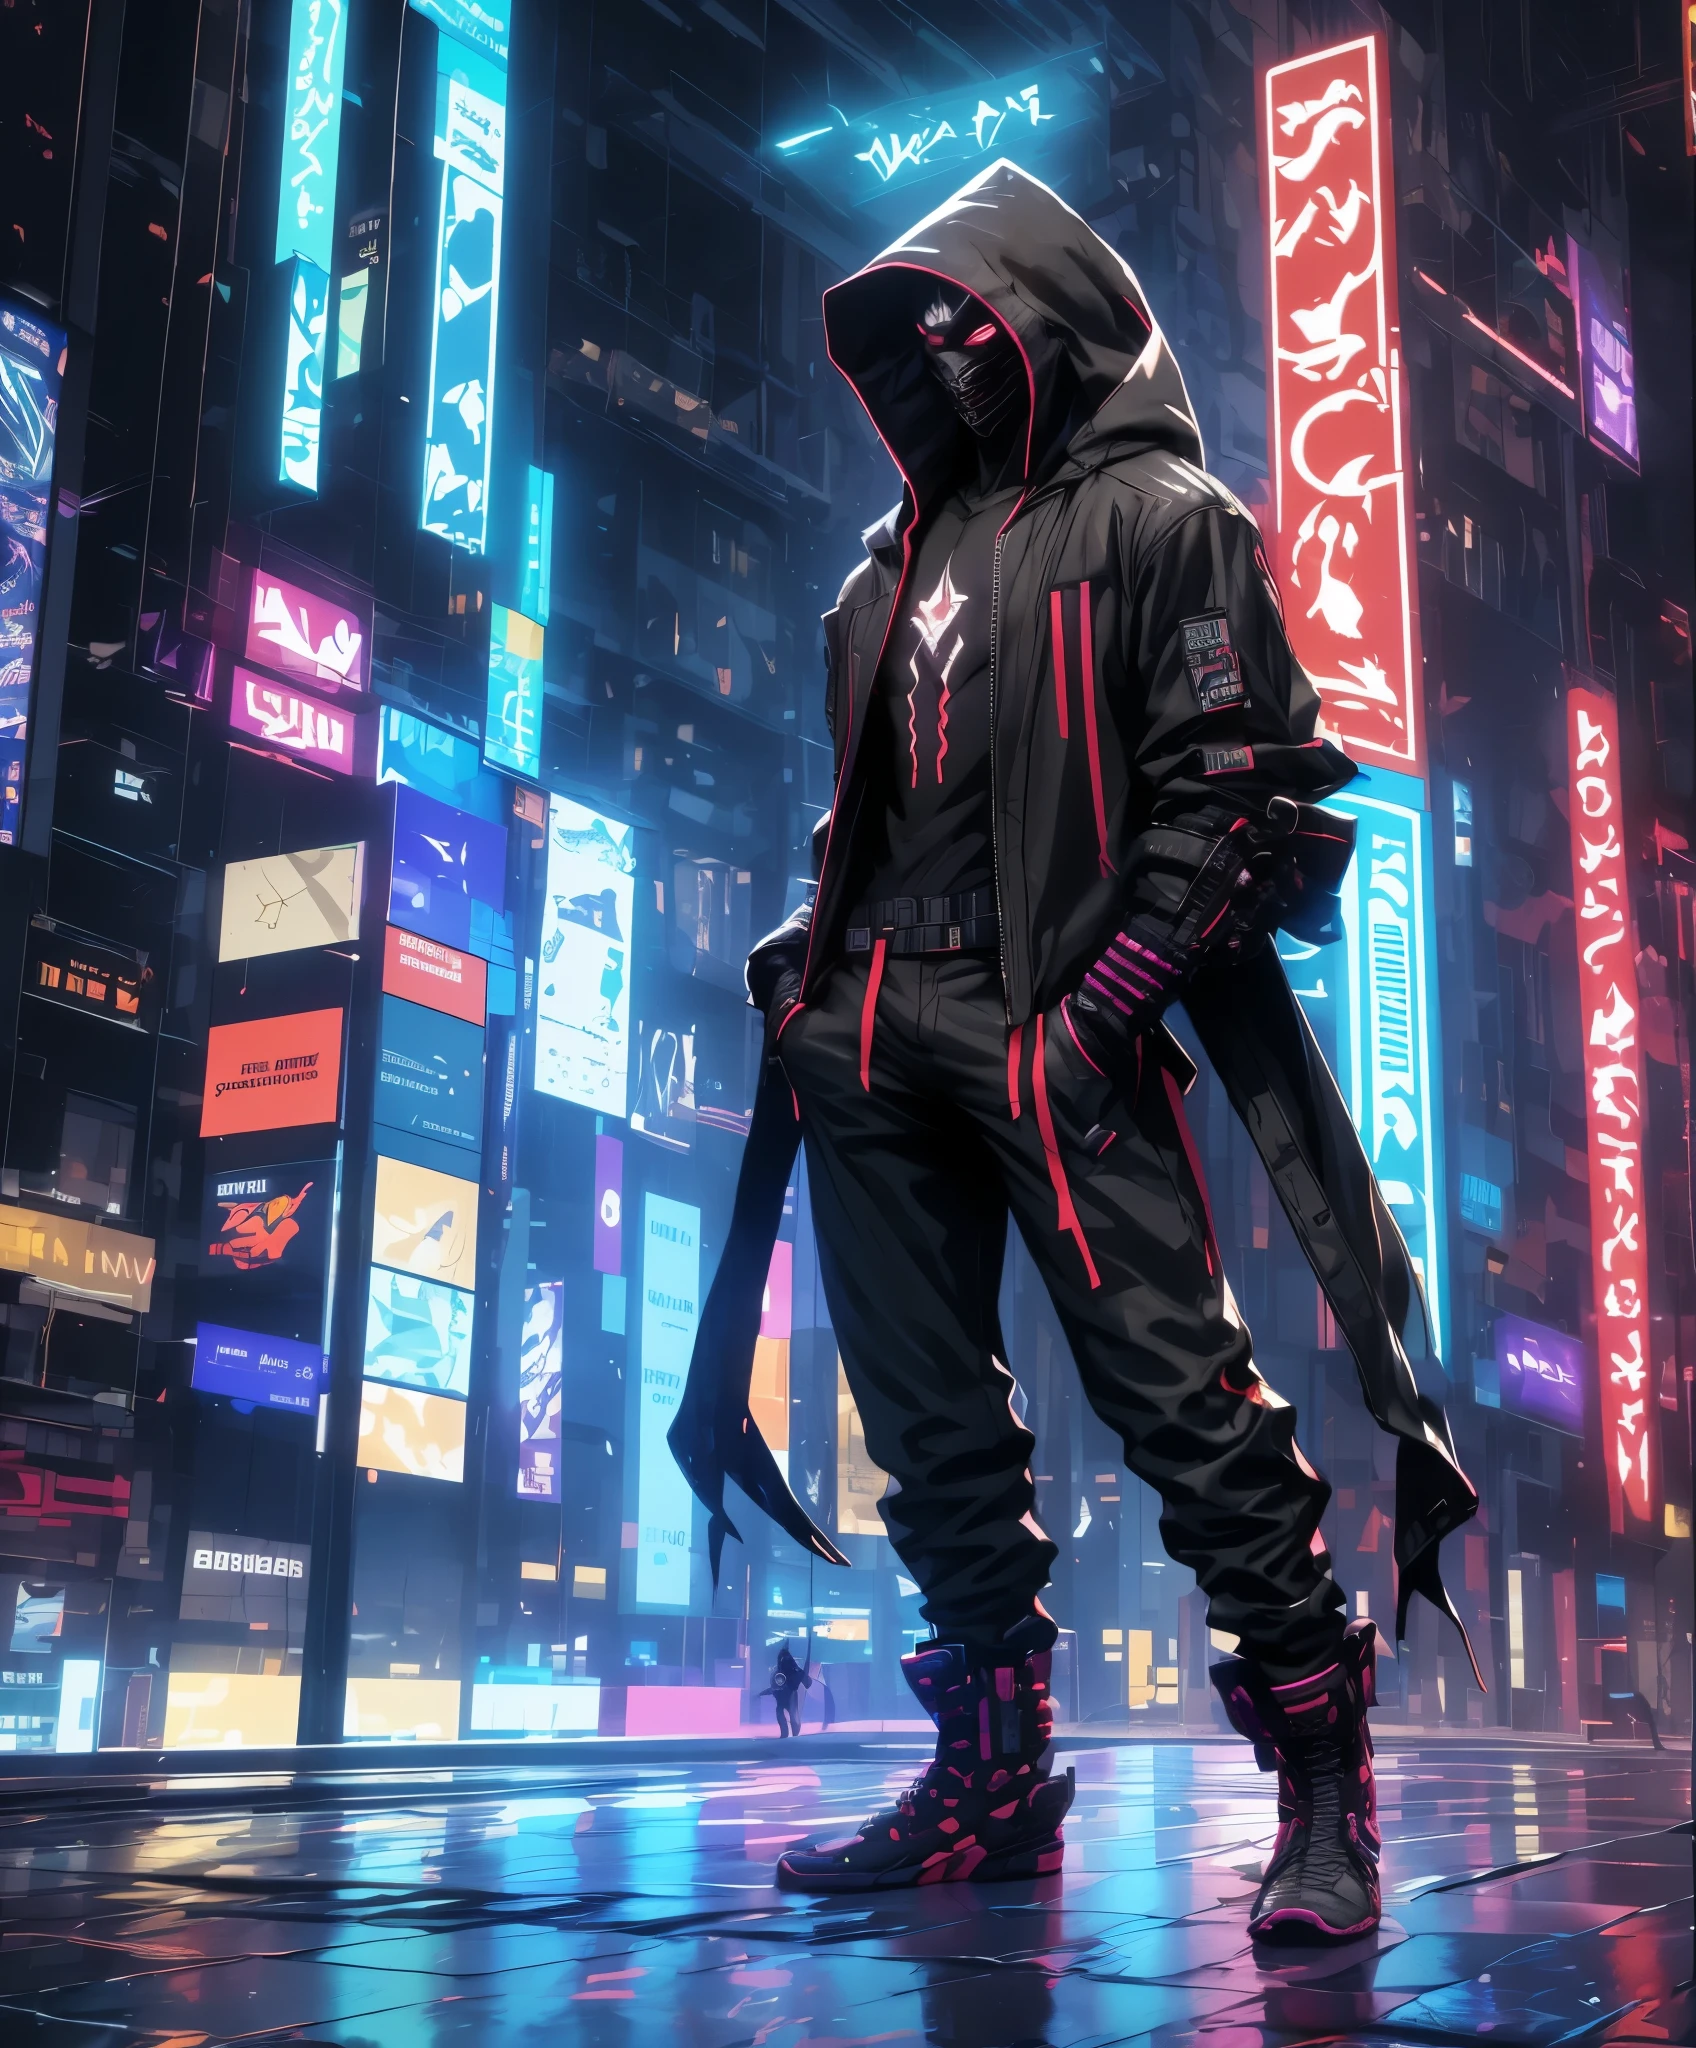 A man wearing a colorful jacket and black pants stands in a dark room, Wearing robes in cult colors, Colorful clothing, character from mortal kombat, As a character in Tekken, fighting game characters, Cyberpunk Assassin, Color masked mage, cyberpunk clothing, Colorful clothes, colored ninja, wearing leather assassin armor, an edgy teenage assassin, cool jacket, cyberpunk street goon